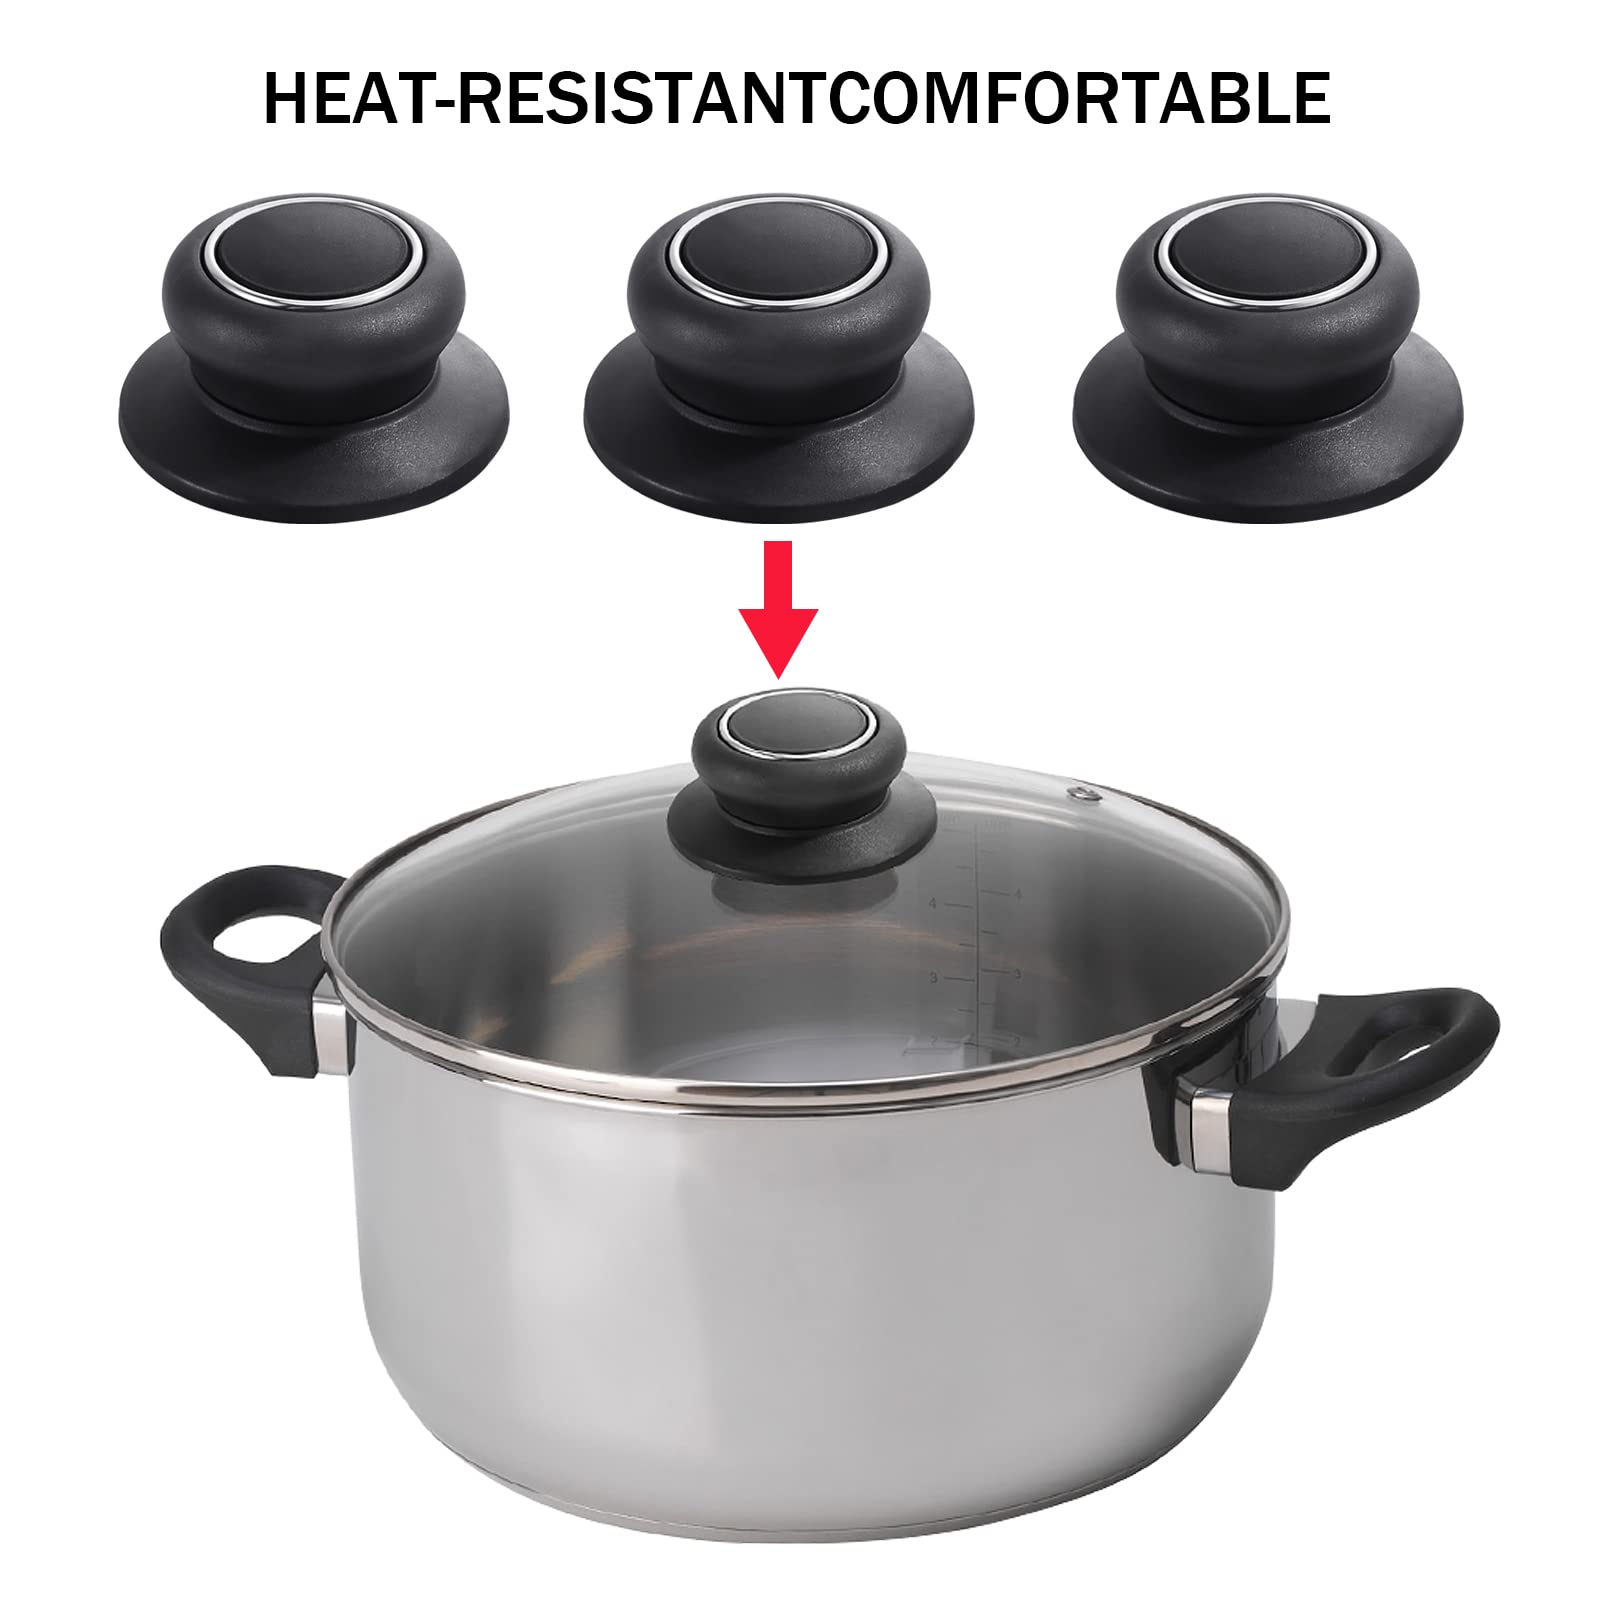 4Pcs Universal Pot Lid Top Replacement Knob,Heat Resistant and Prevent static electricity,Easy installation Kitchen Cookware Replacement Pan Lid Holding Handles. (Black)